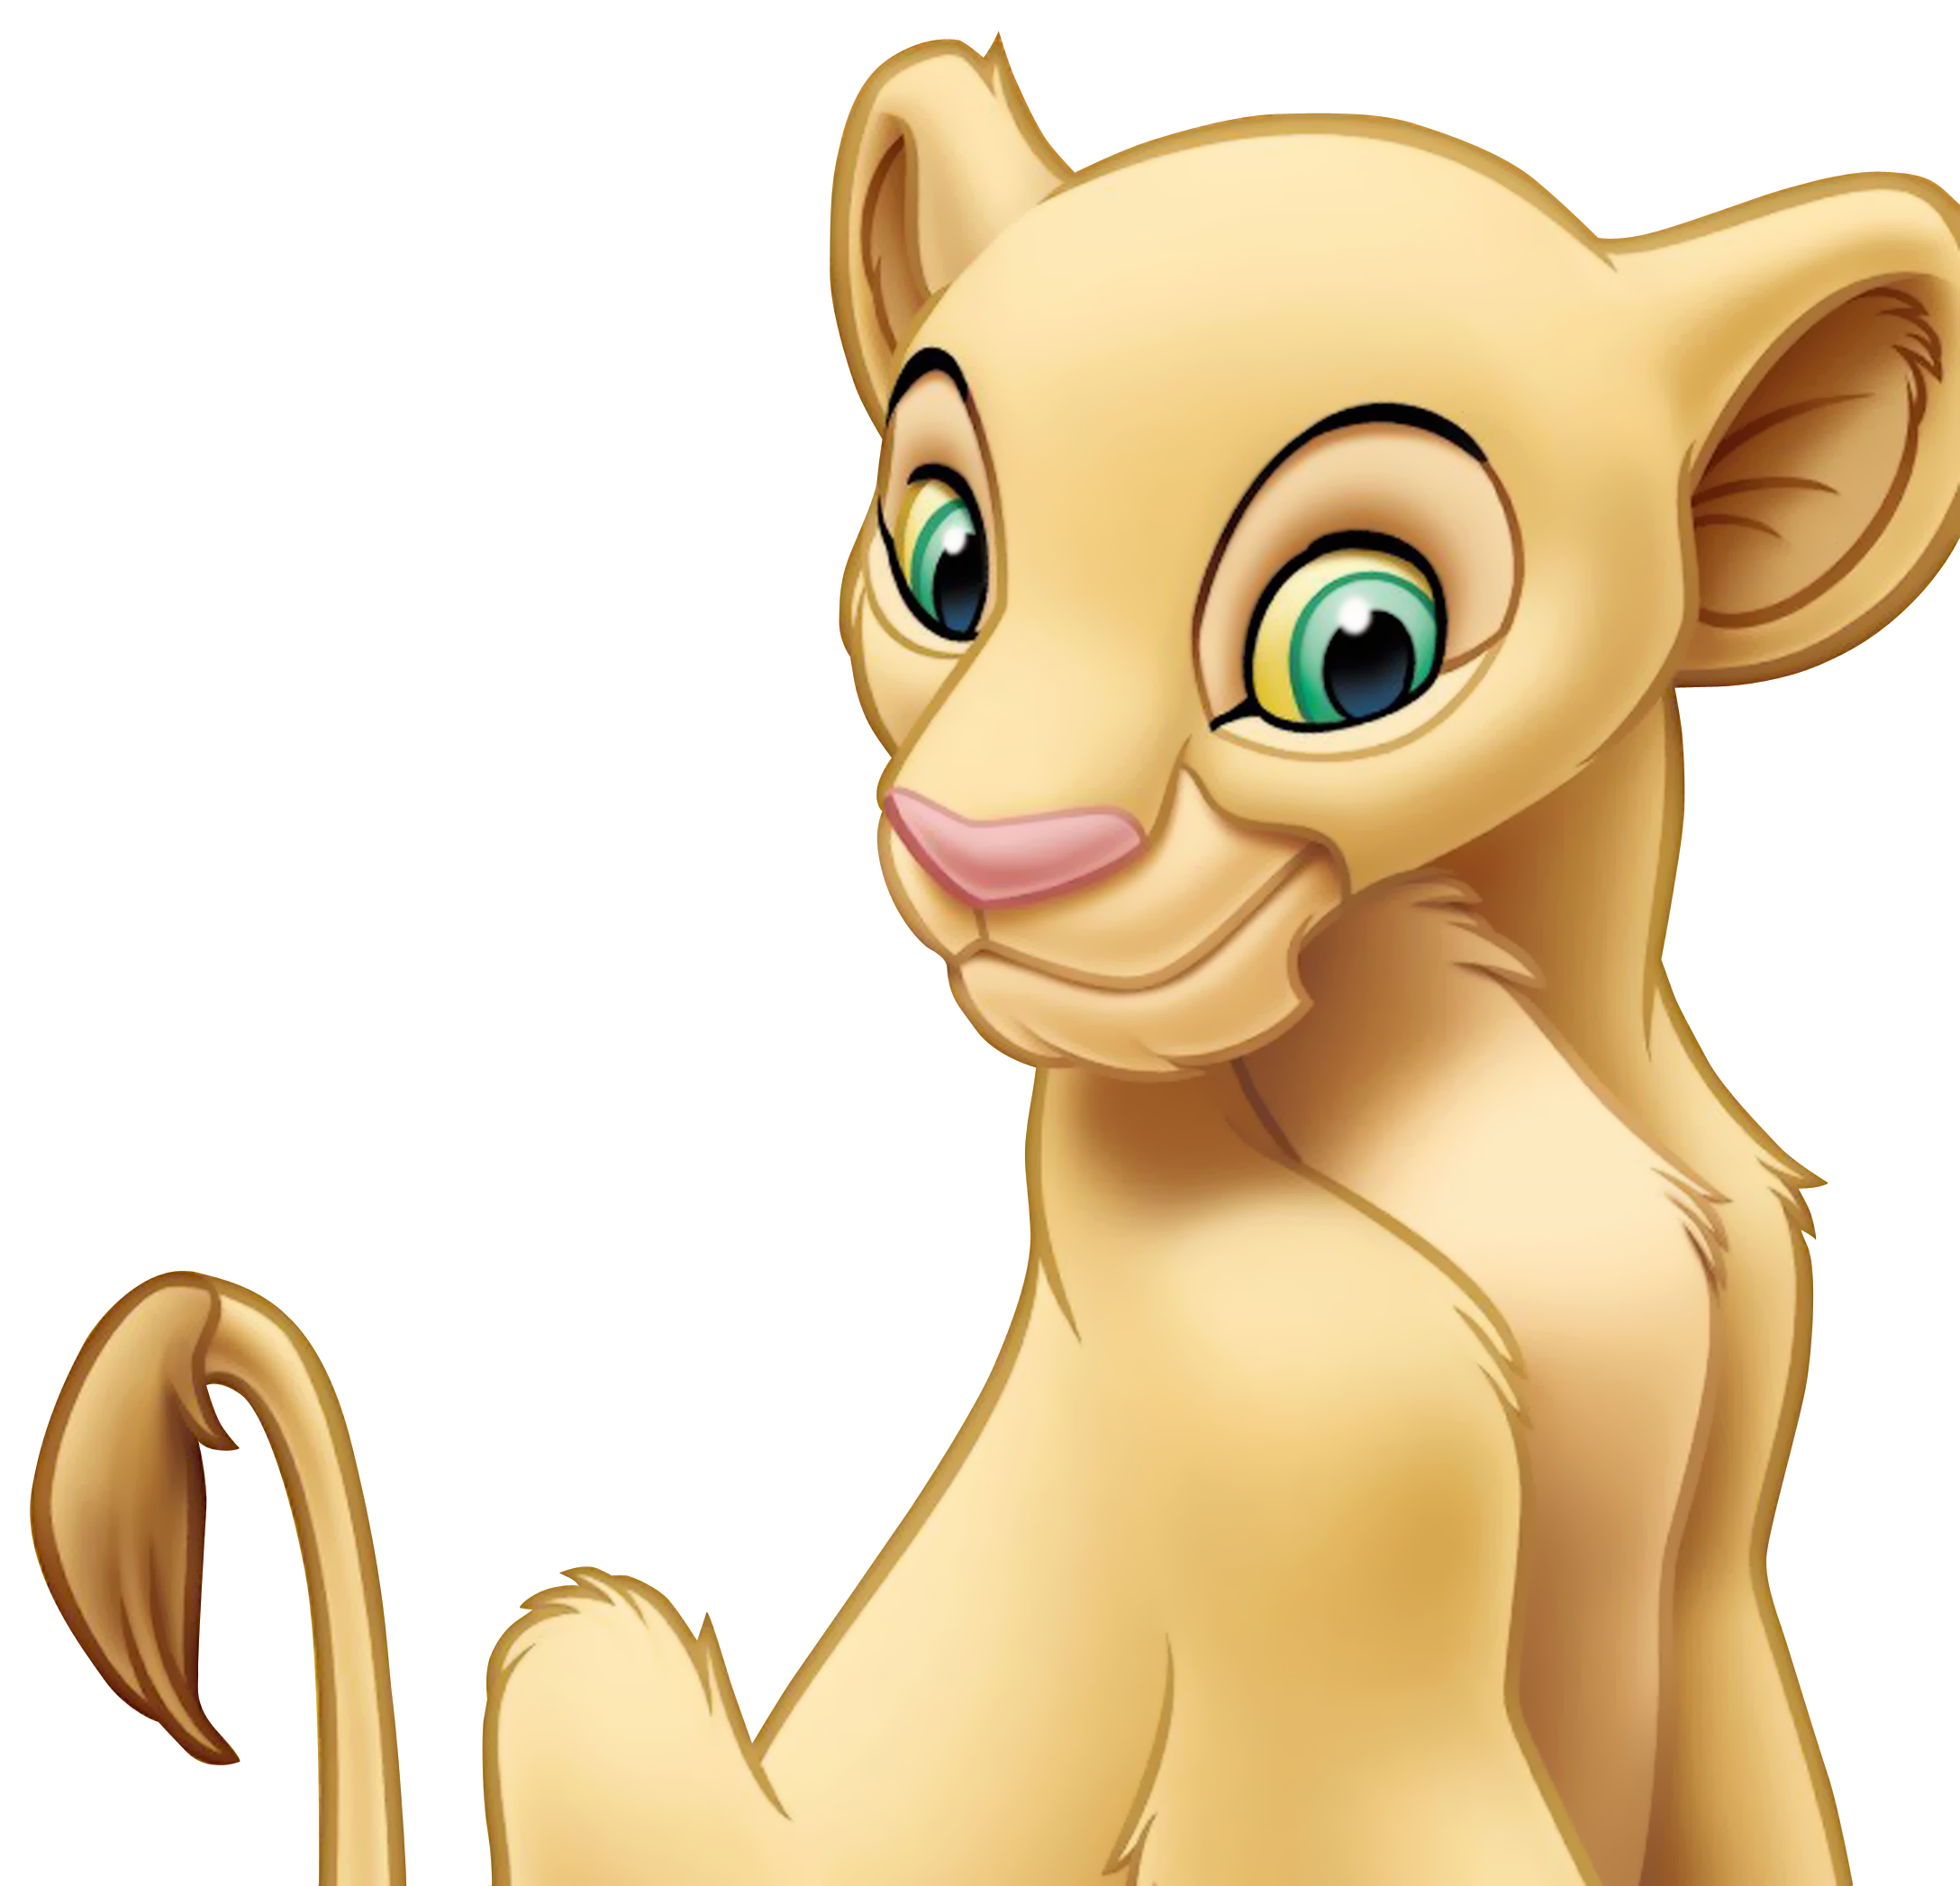 King png image purepng. Ear clipart lion